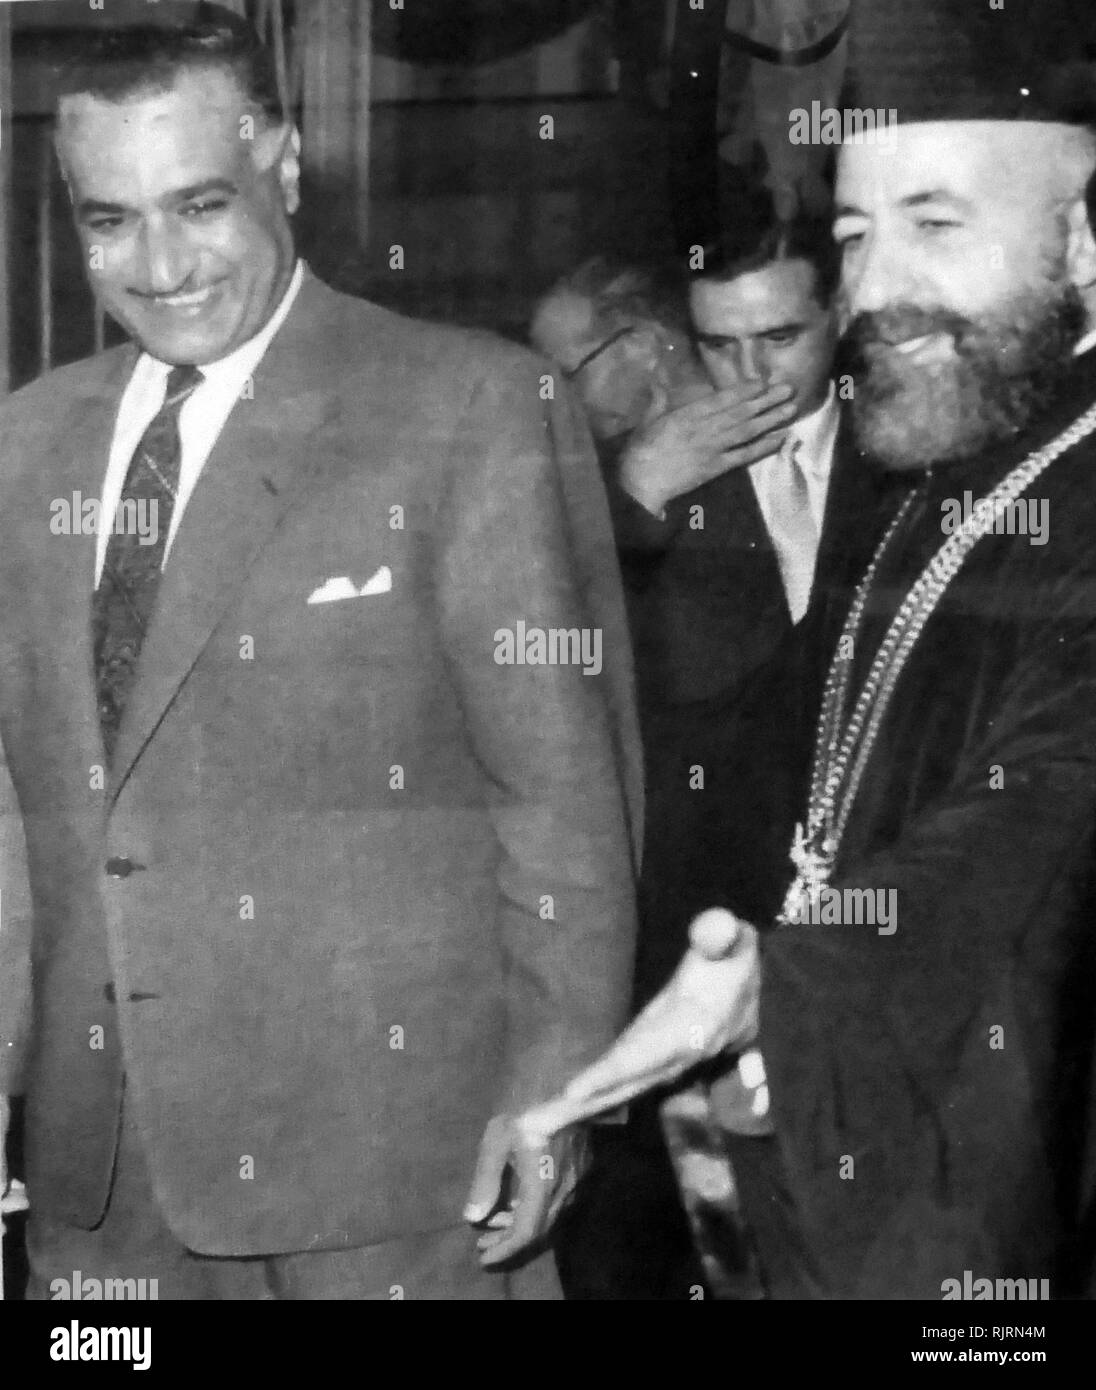 President Nasser meets with Greek Cypriot President, Archbishop Makarios in Cairo, 1961. Gamal Abdel Nasser (1918 - 1970), President of Egypt, from 1956 until his death in 1970. Nasser led the 1952 overthrow of the monarchy and introduced far-reaching land reforms the following year Stock Photo